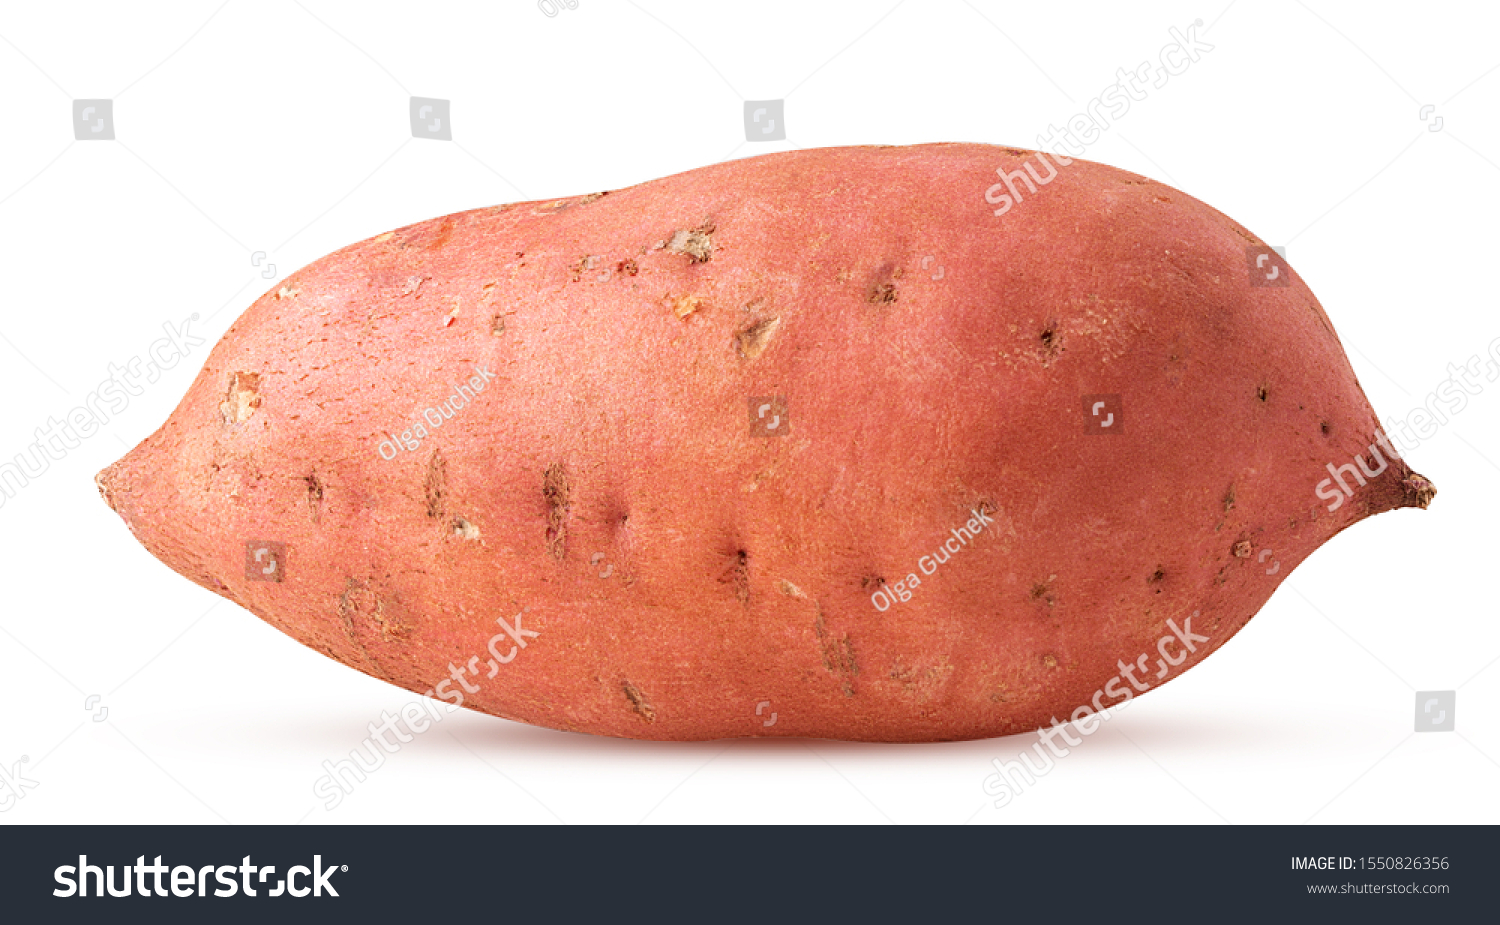 Sweet potato isolated on white background. Clipping Path. Full depth of field. #1550826356